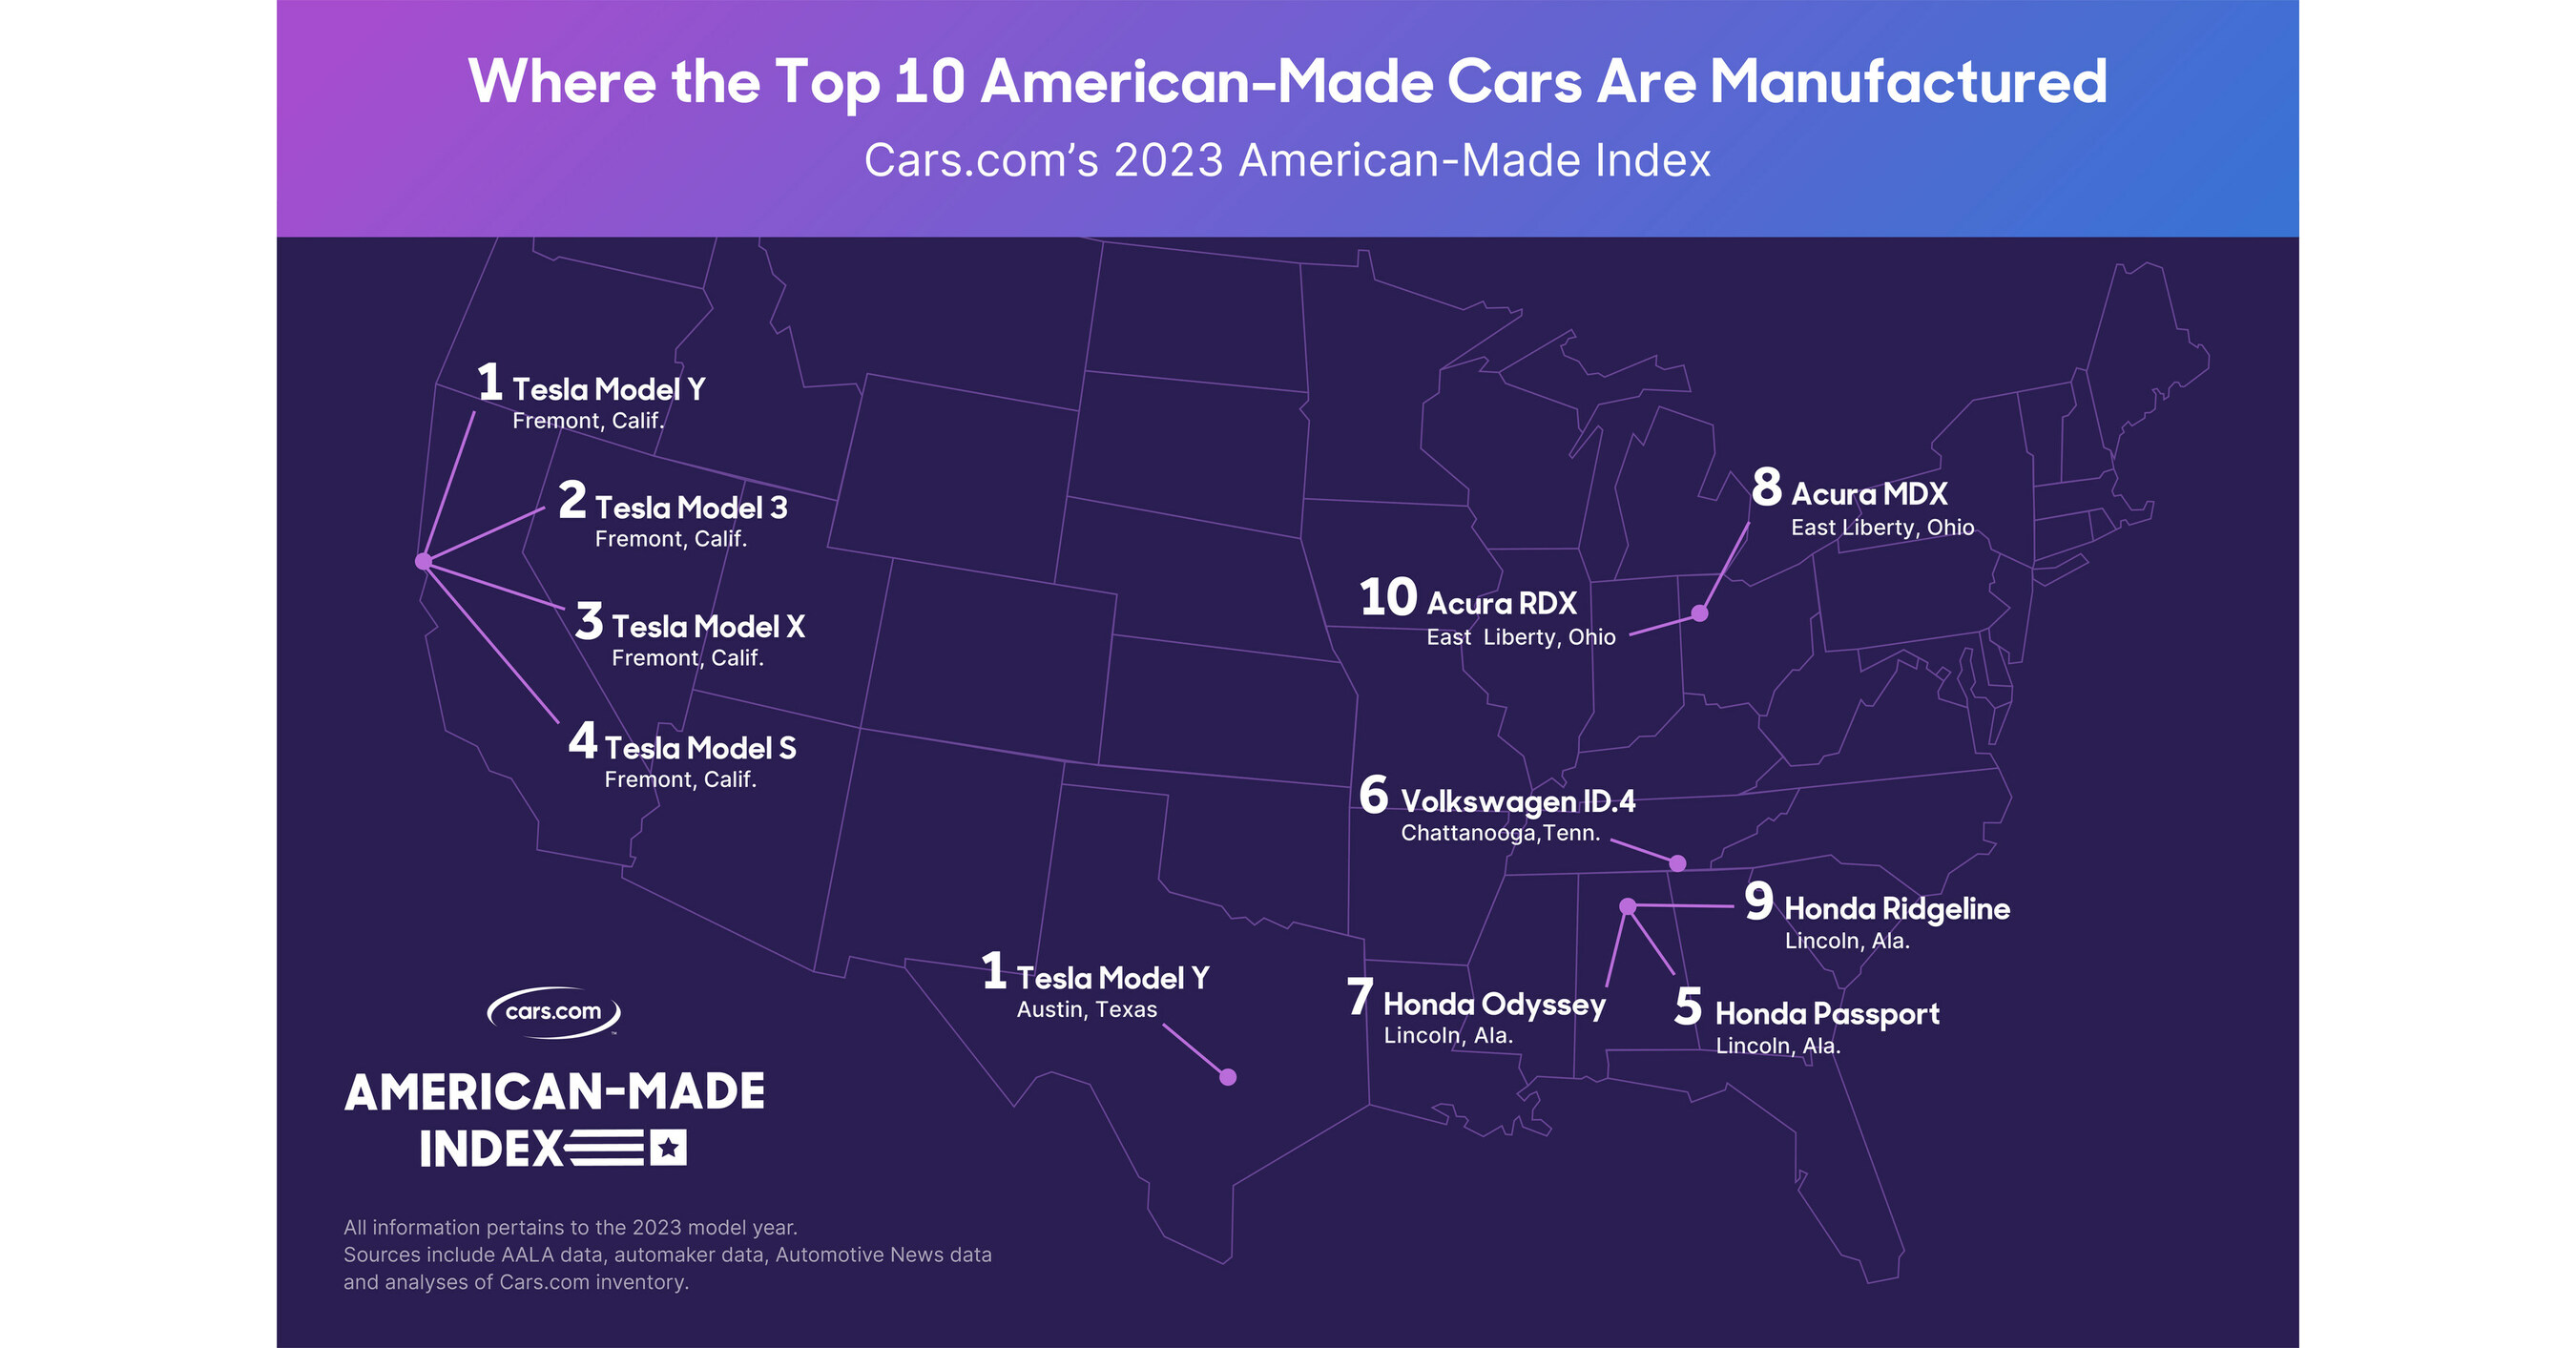 AMERICANMADE INDEX SEES 260 JUMP IN ELECTRIFIED VEHICLES